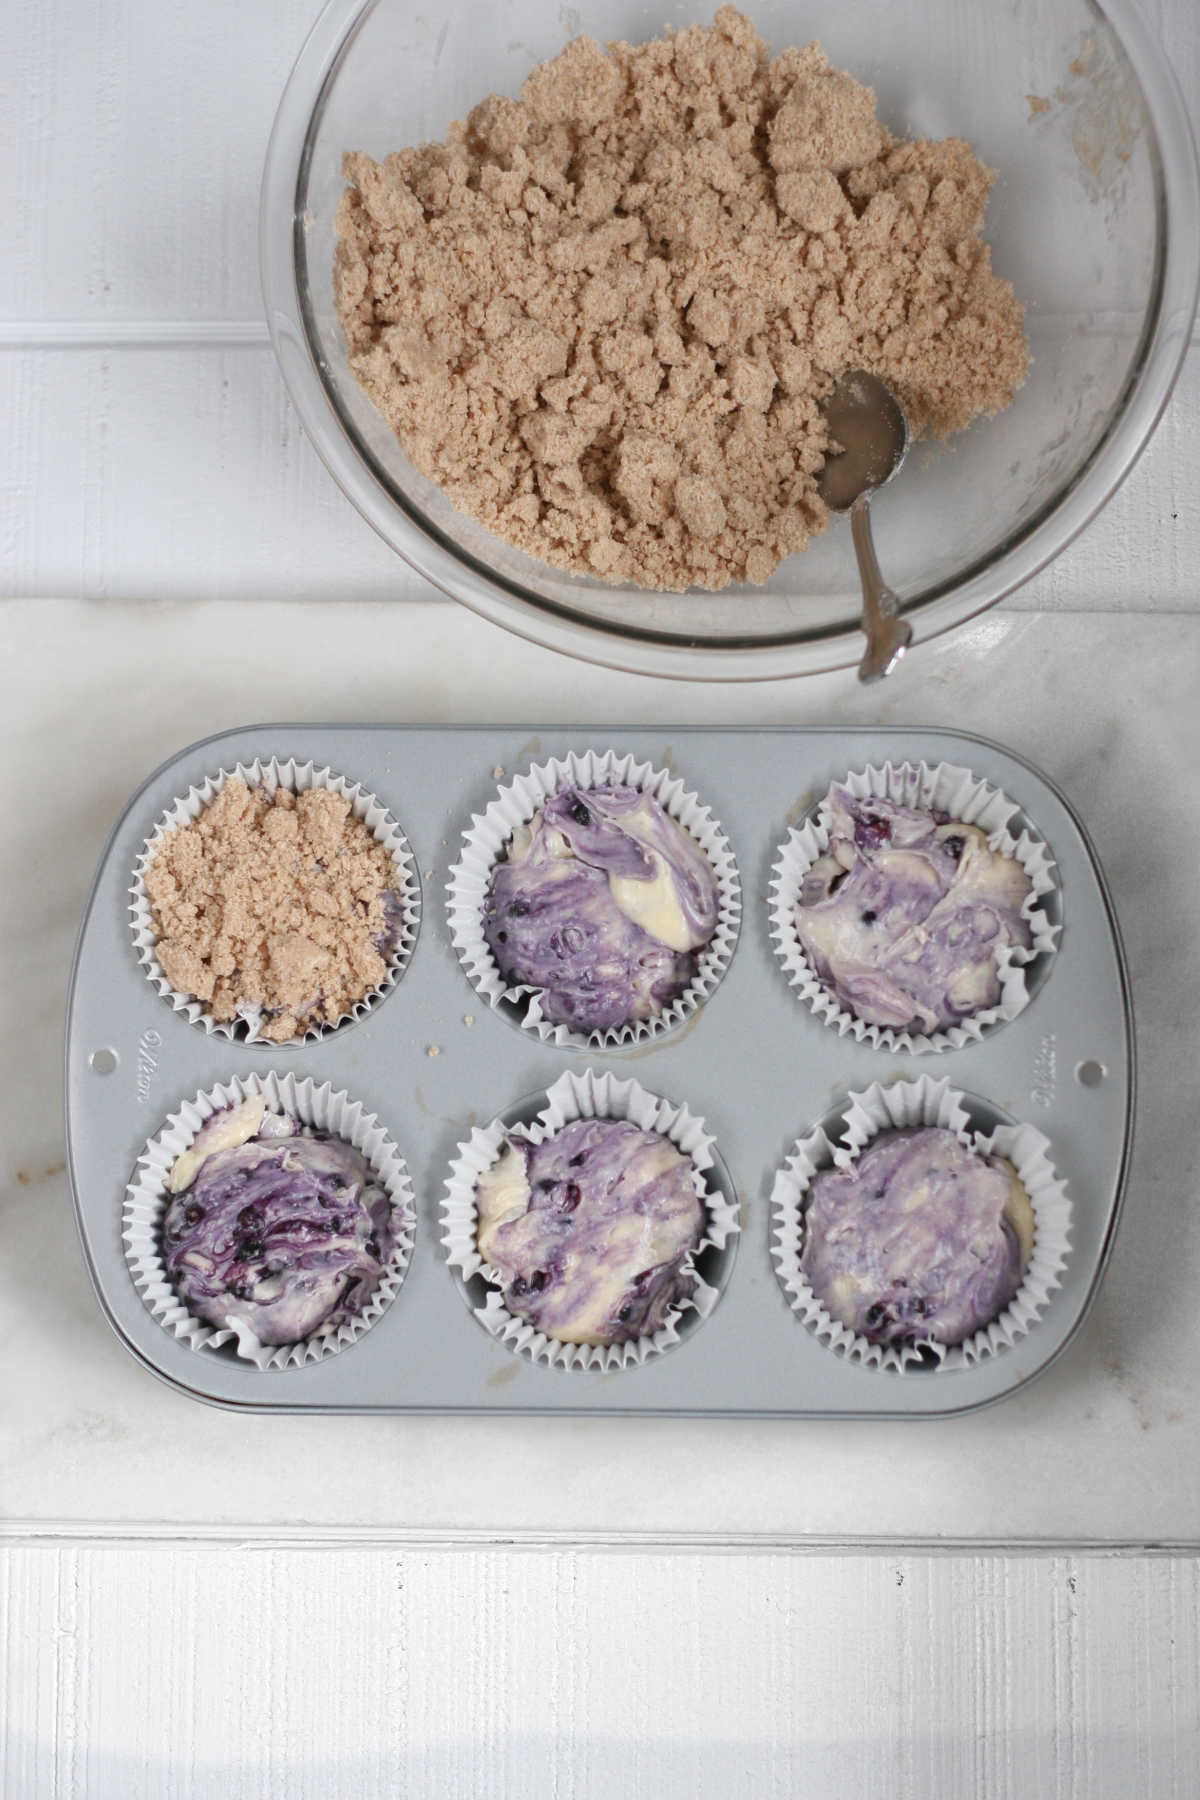 Jumbo muffin pan with white paper liners filled with blueberry muffin batter.